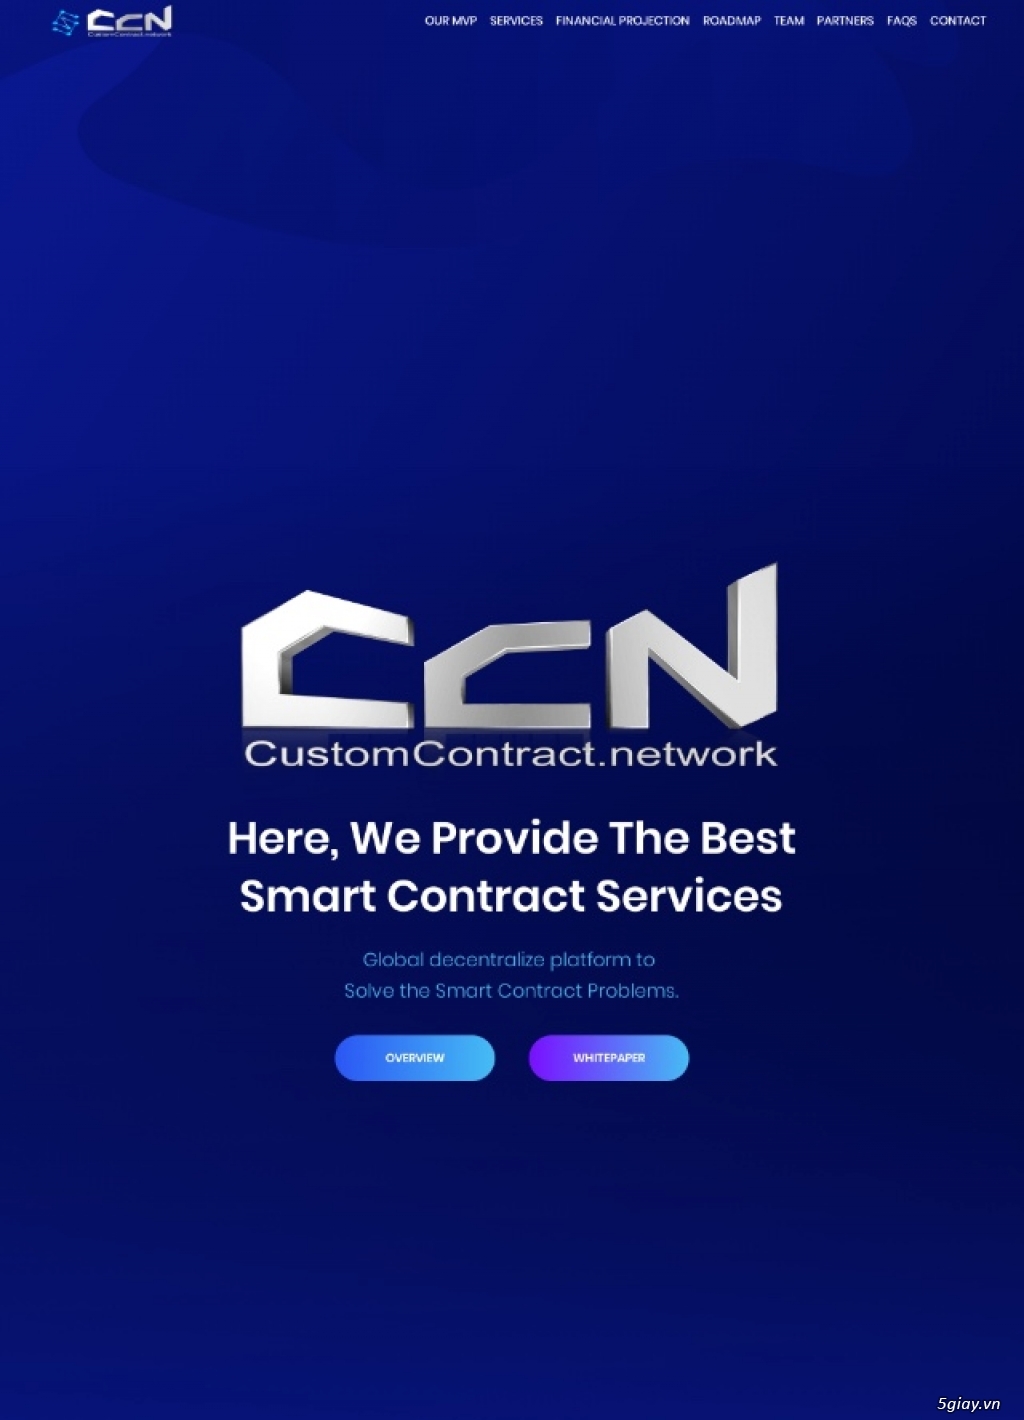 CCN | Global decentralize platform to Solve the Smart Contract Problems. - 1